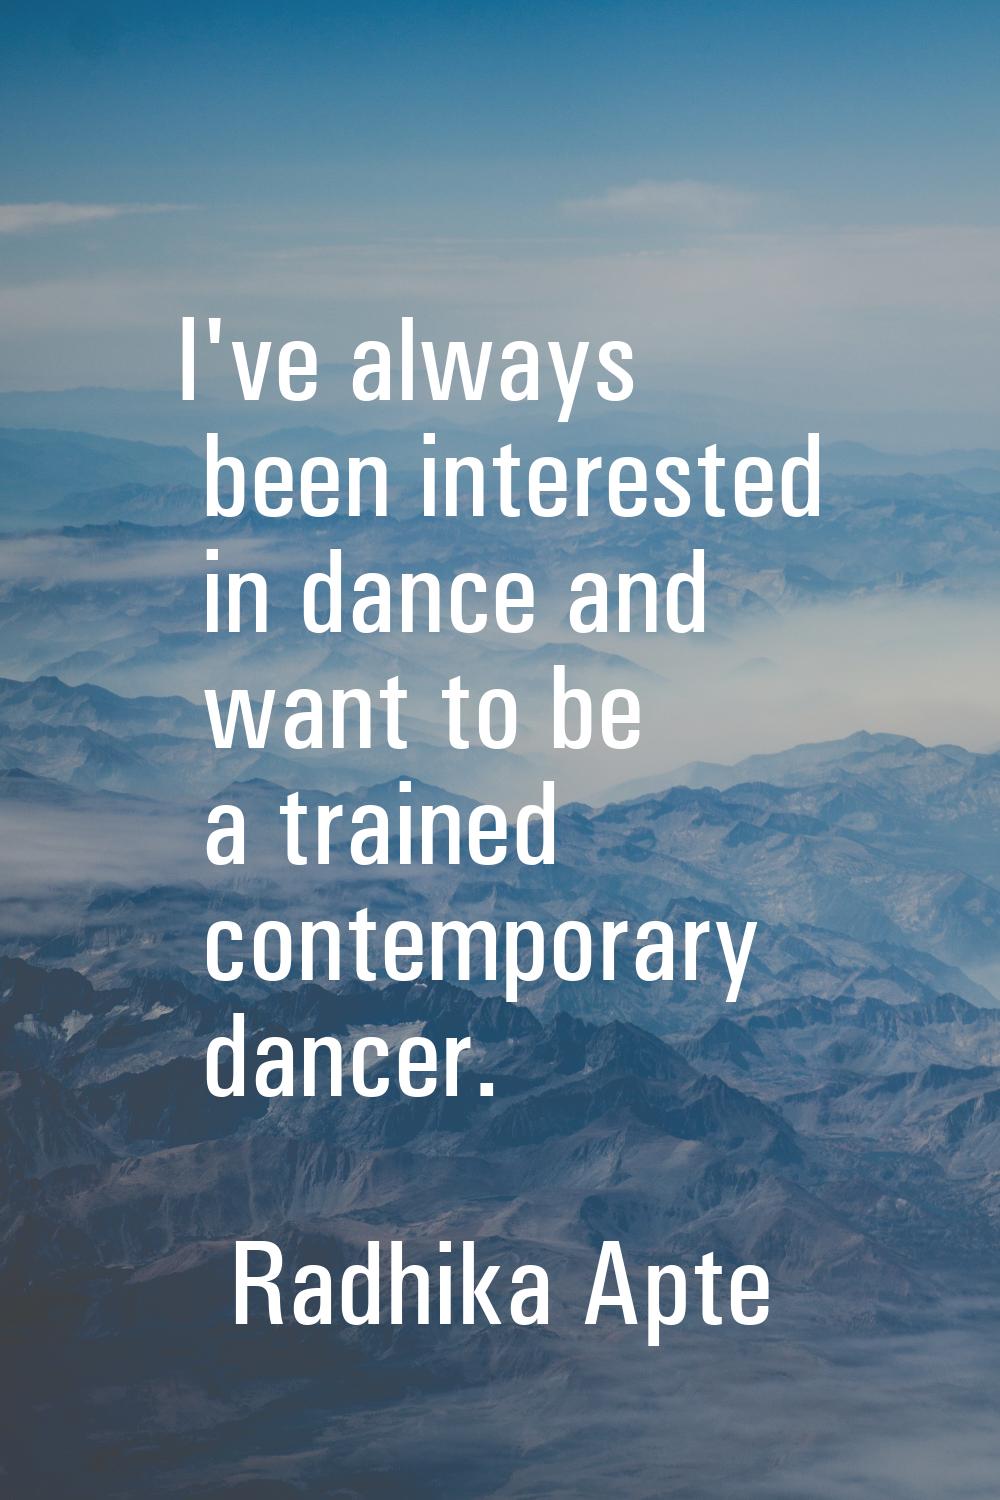 I've always been interested in dance and want to be a trained contemporary dancer.